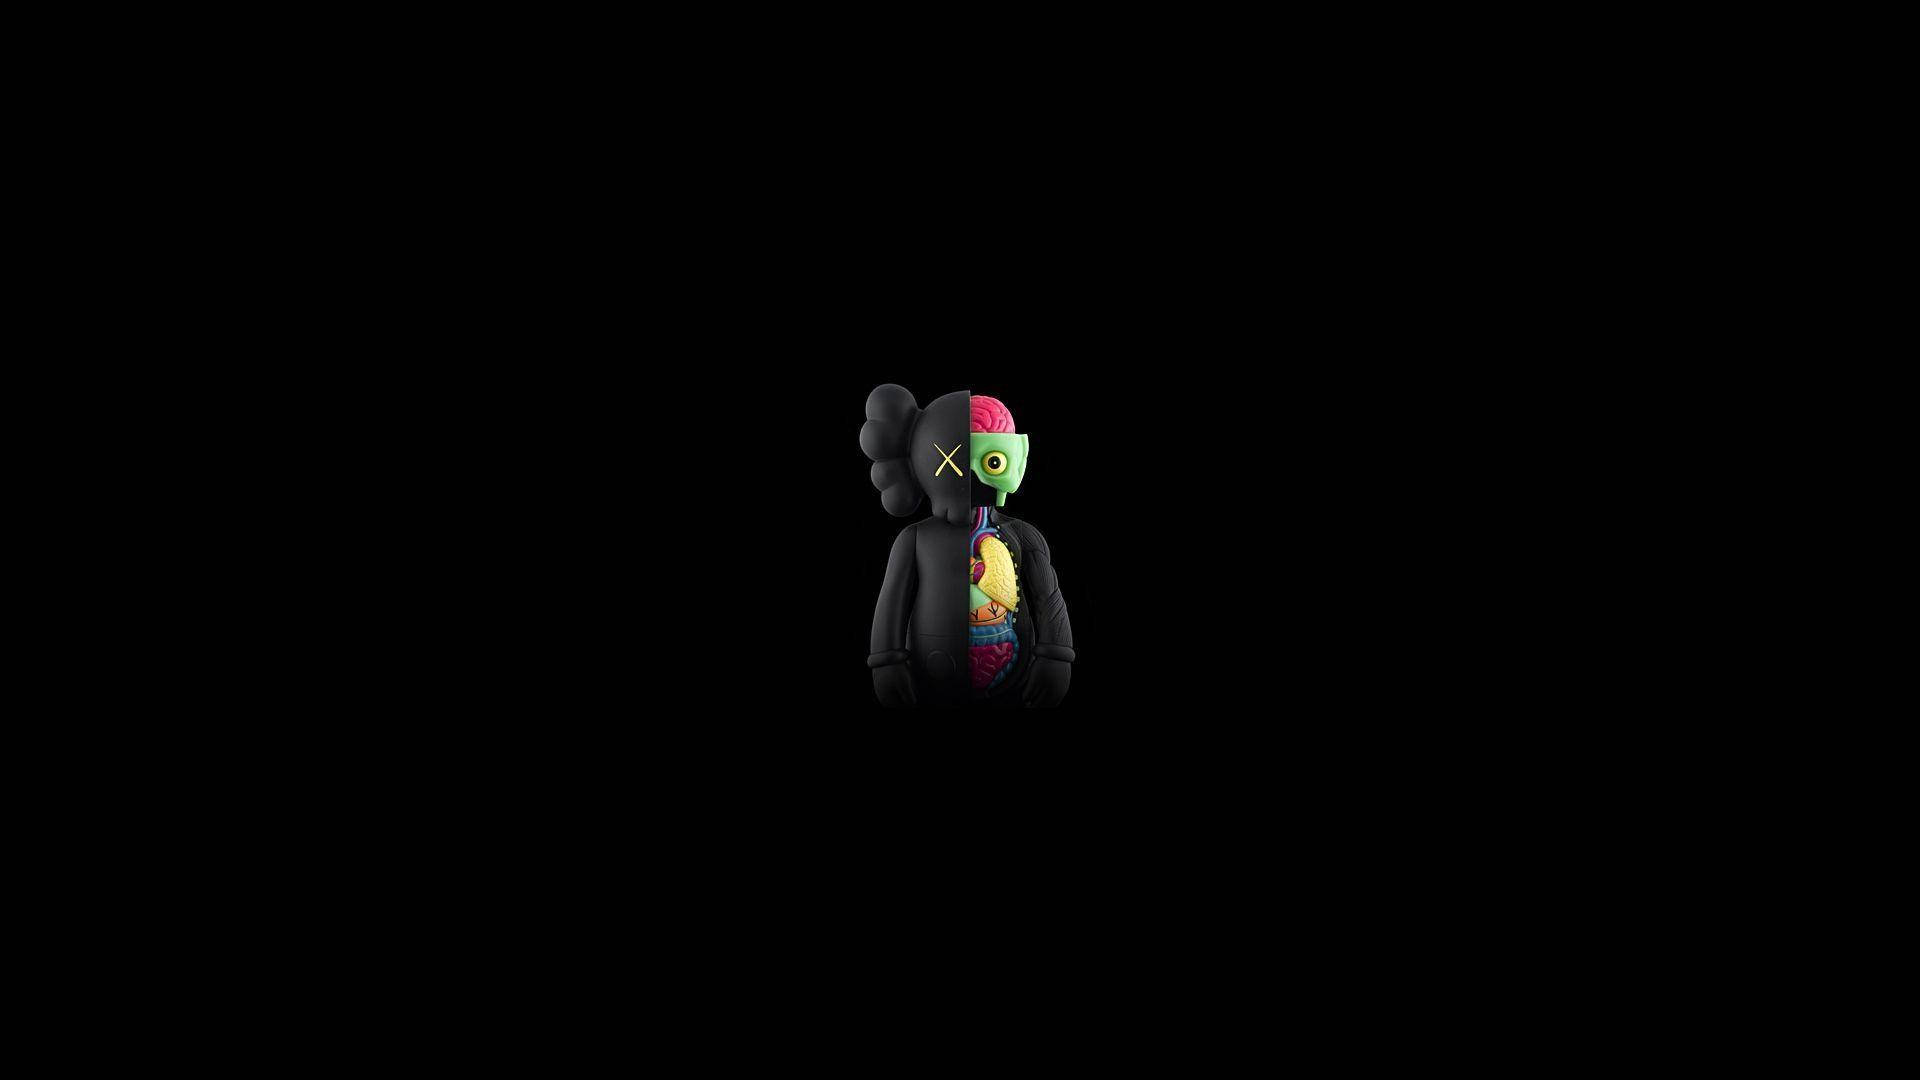 Dissected Shadow Kaws 4k Wallpaper